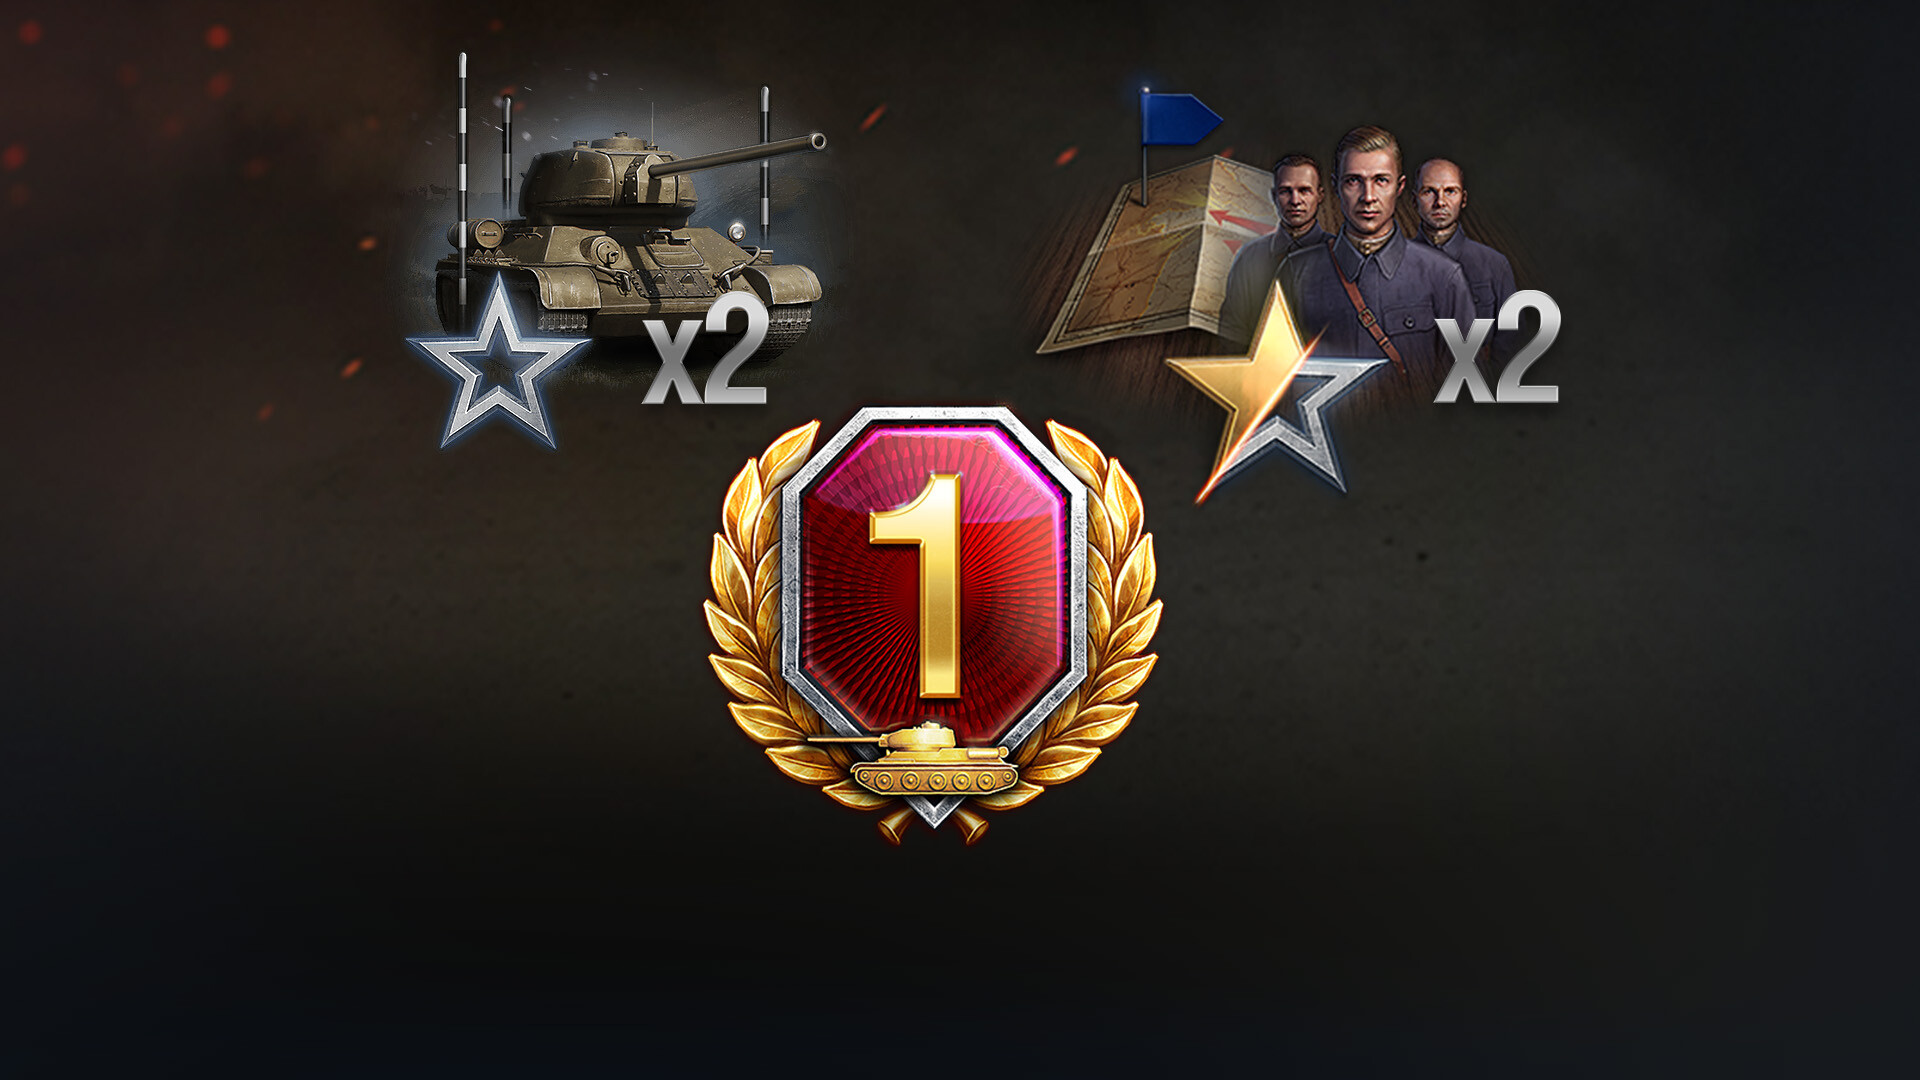 World of Tanks — Wargaming Party Free Pack Featured Screenshot #1